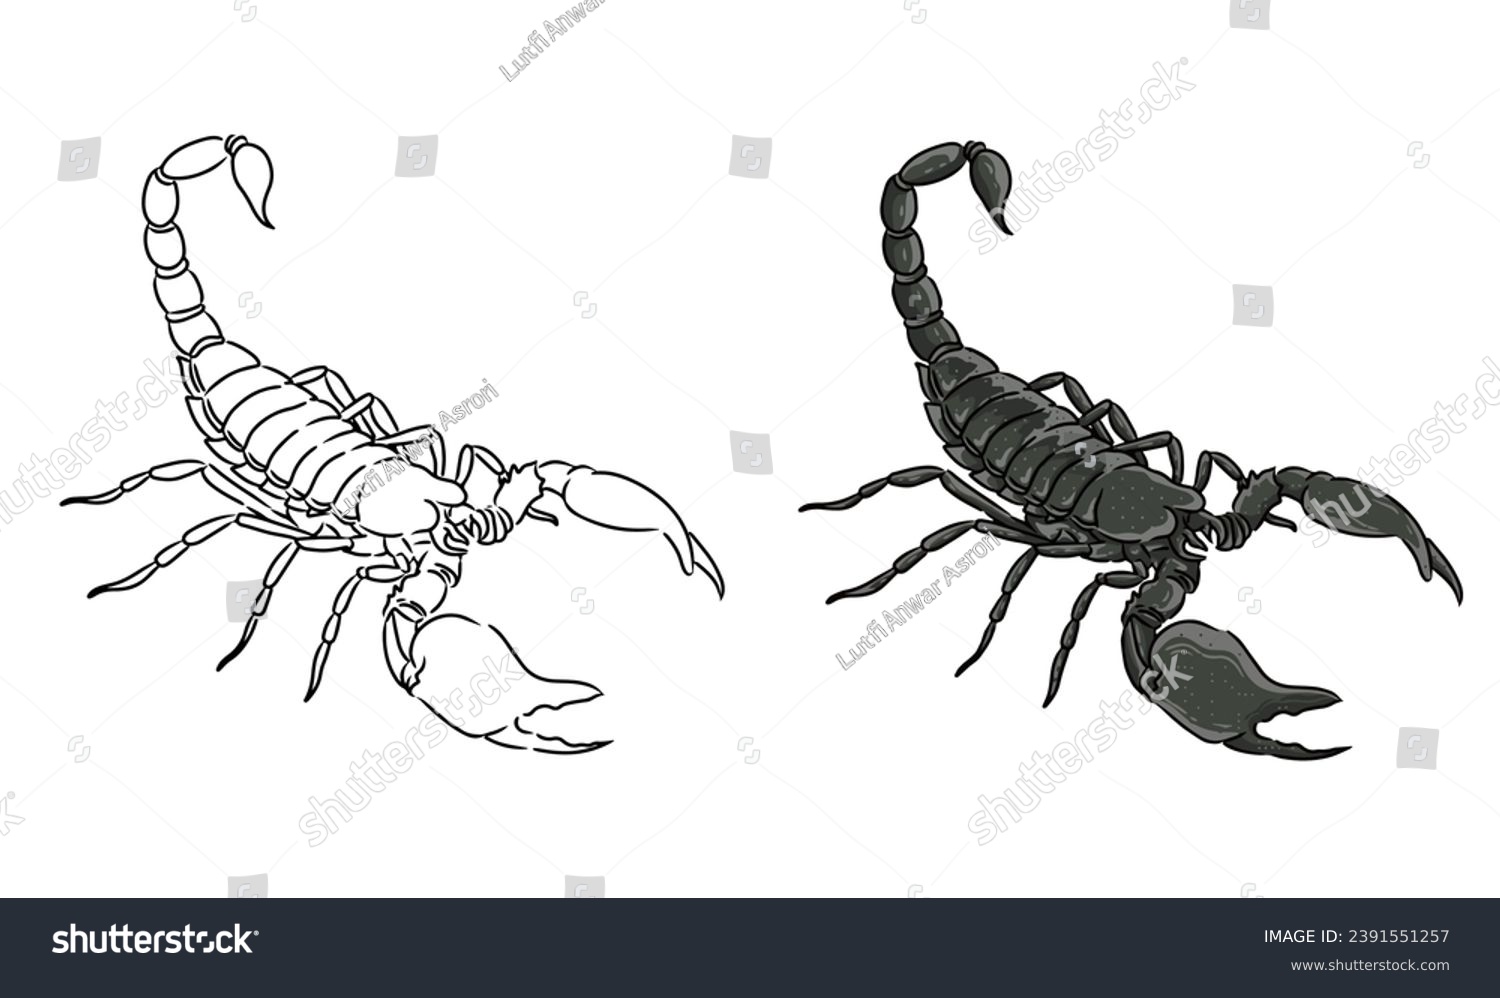 SVG of Scorpion vector coloring page image. Scorpion Vector. Scorpion Sketch svg